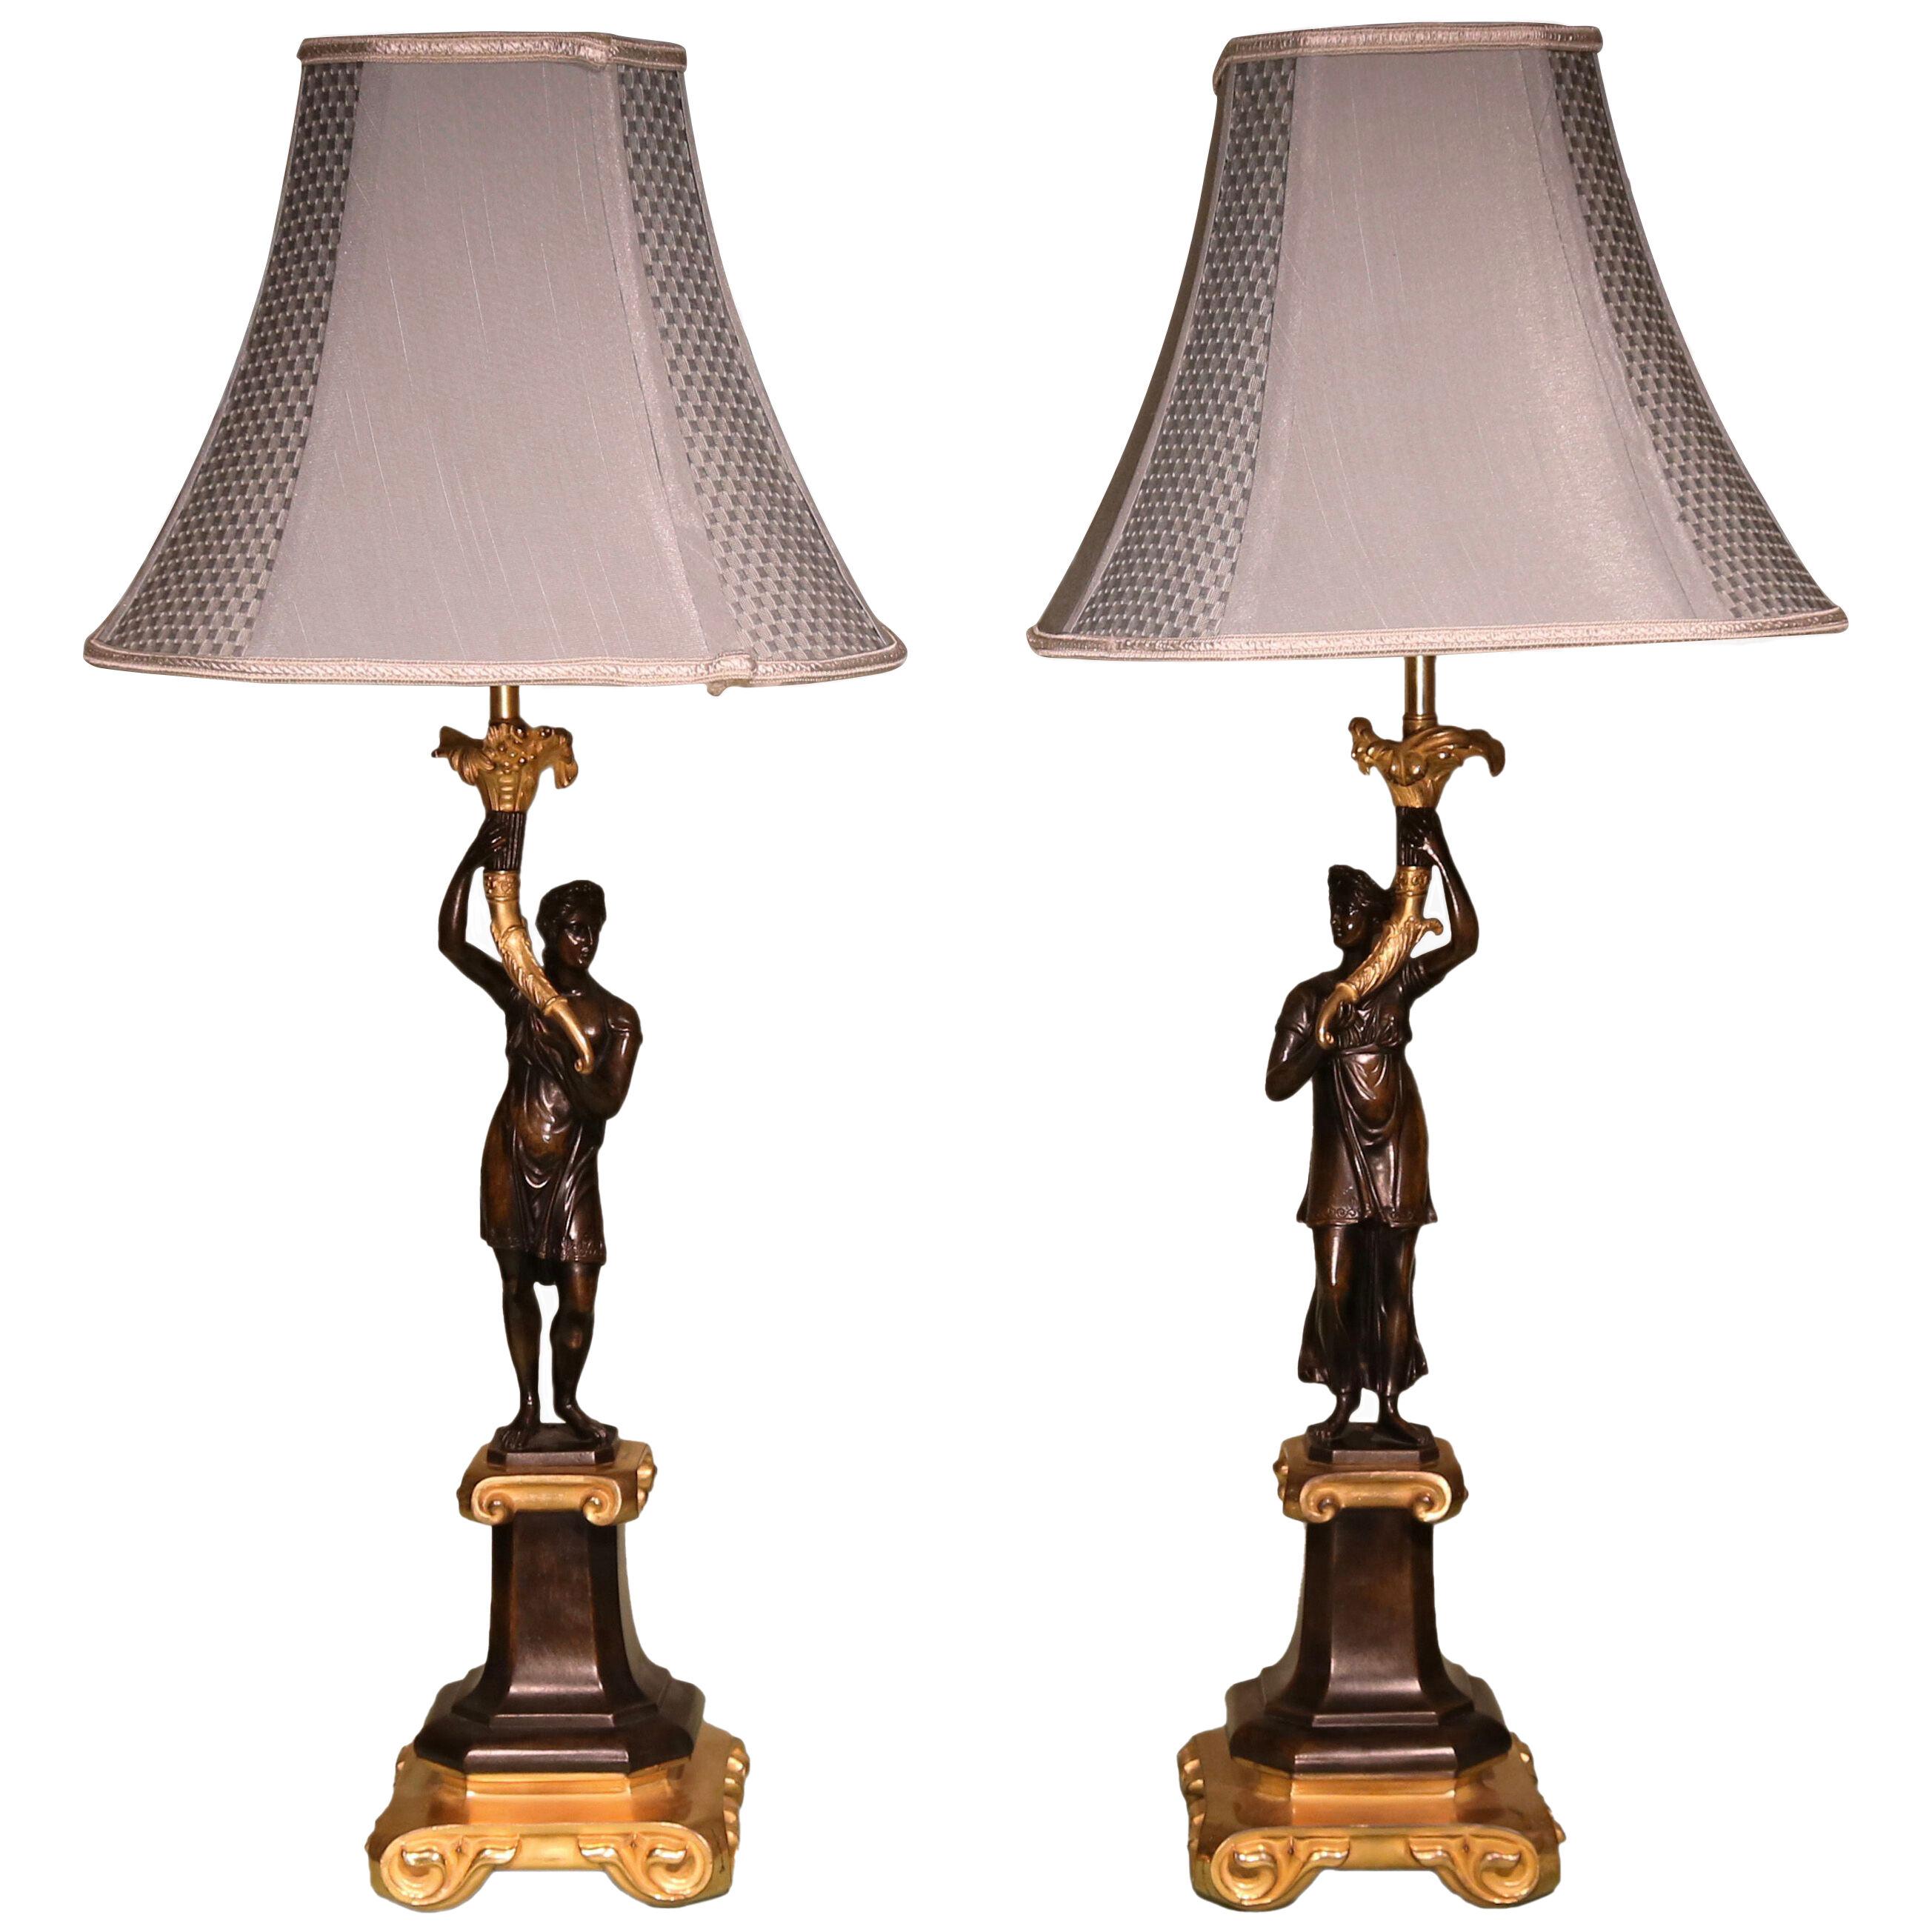 An unusual pair of bronze figure candlestick lamps